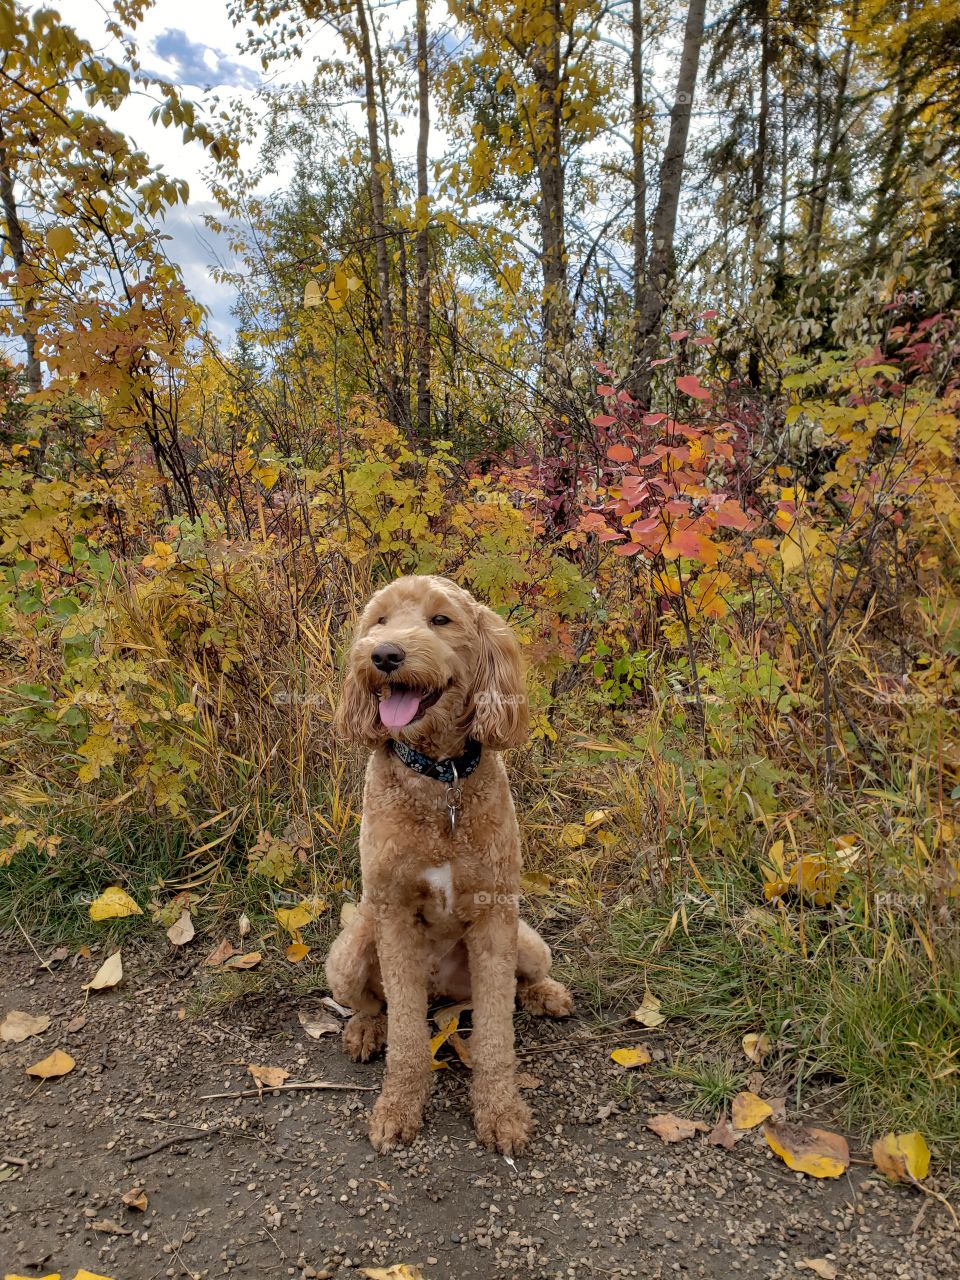 Larry the doodle enjoying a fall day.